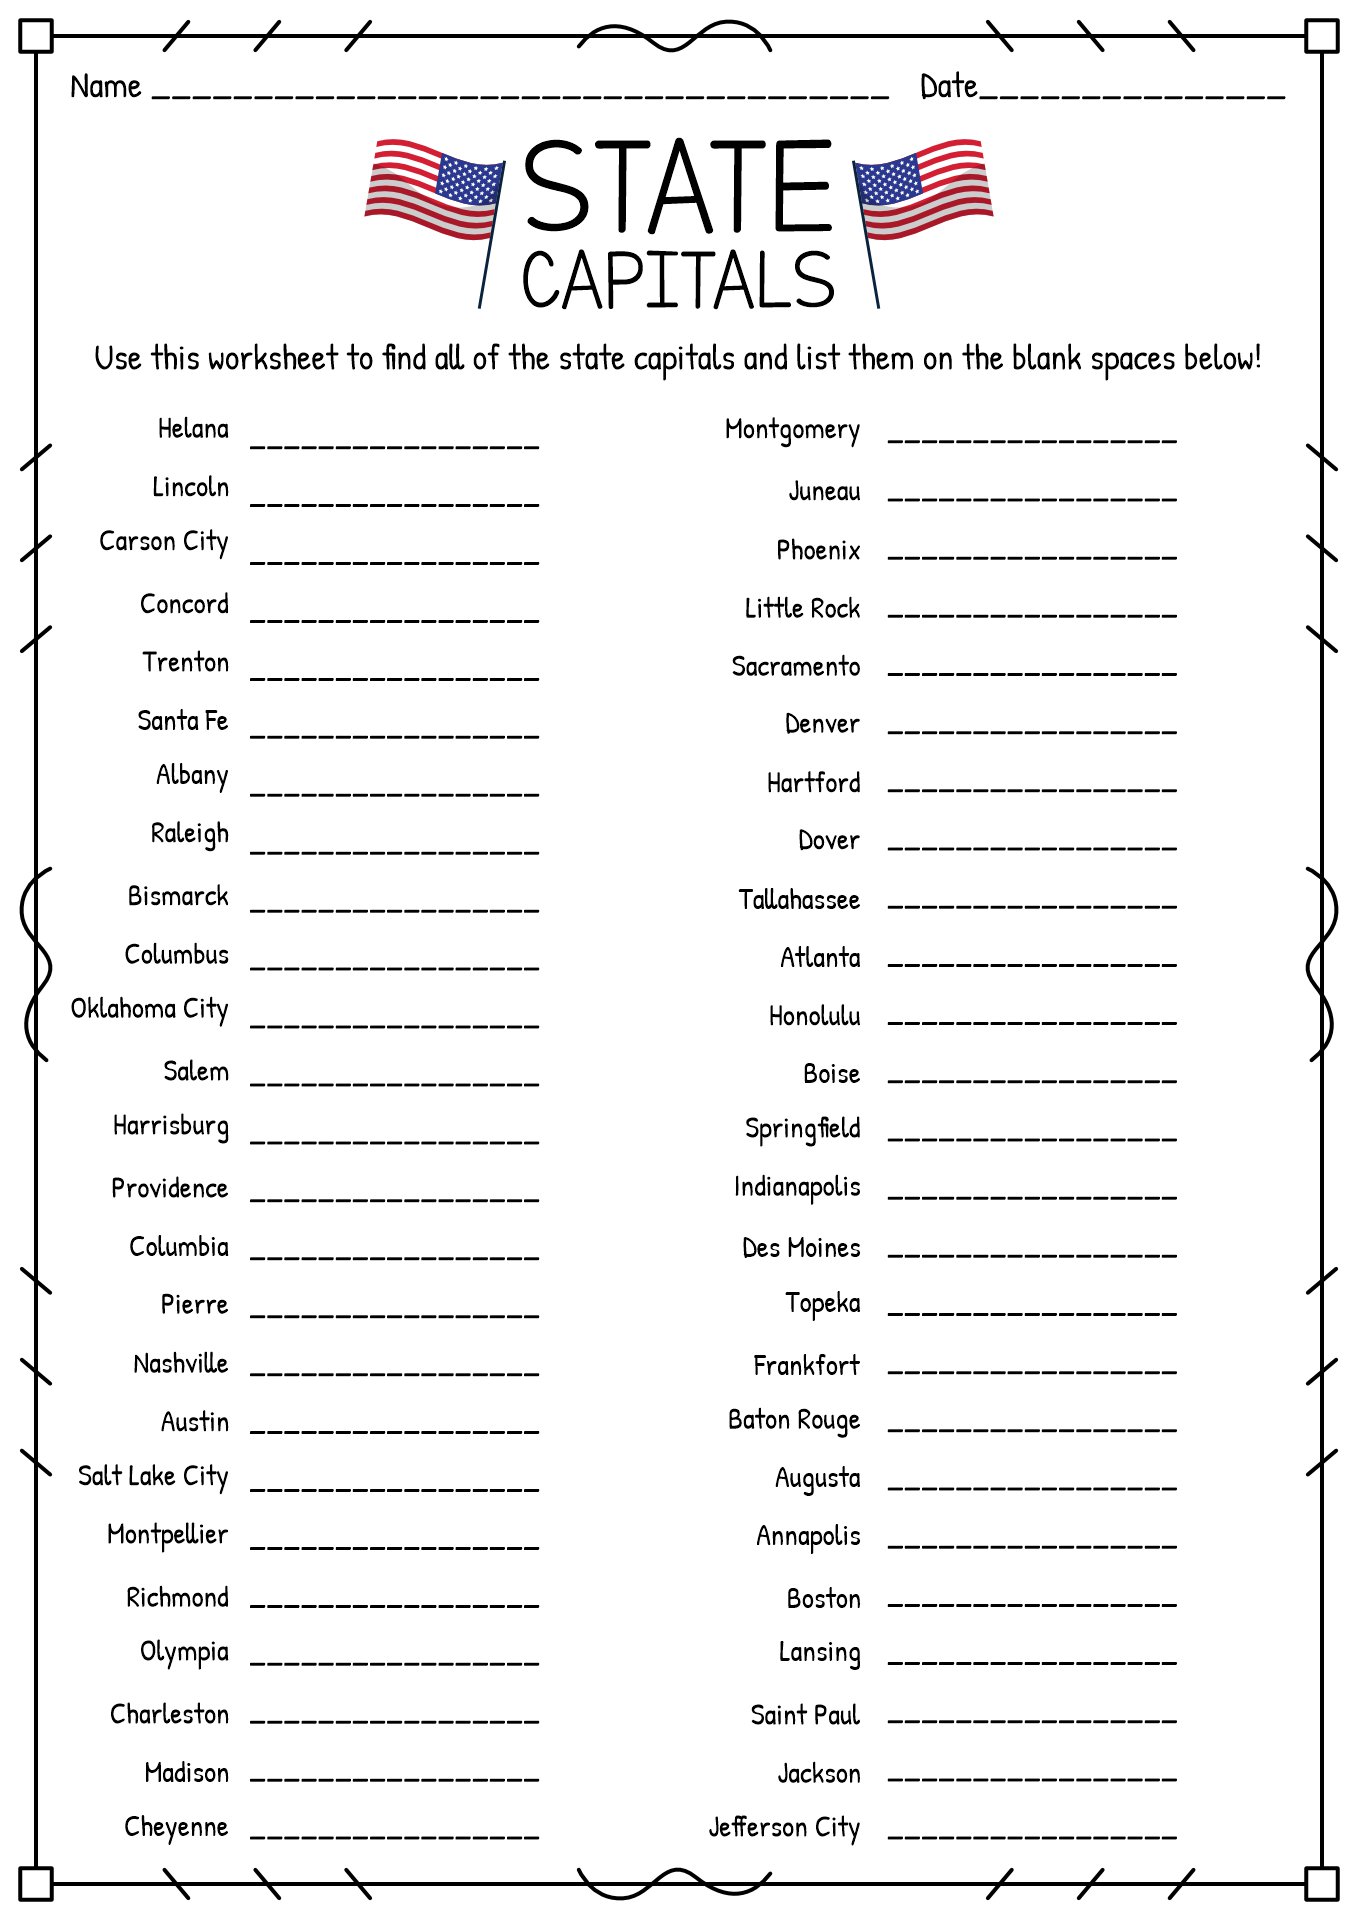 50-states-map-quiz-printable-states-and-capitals-map-worksheets-map